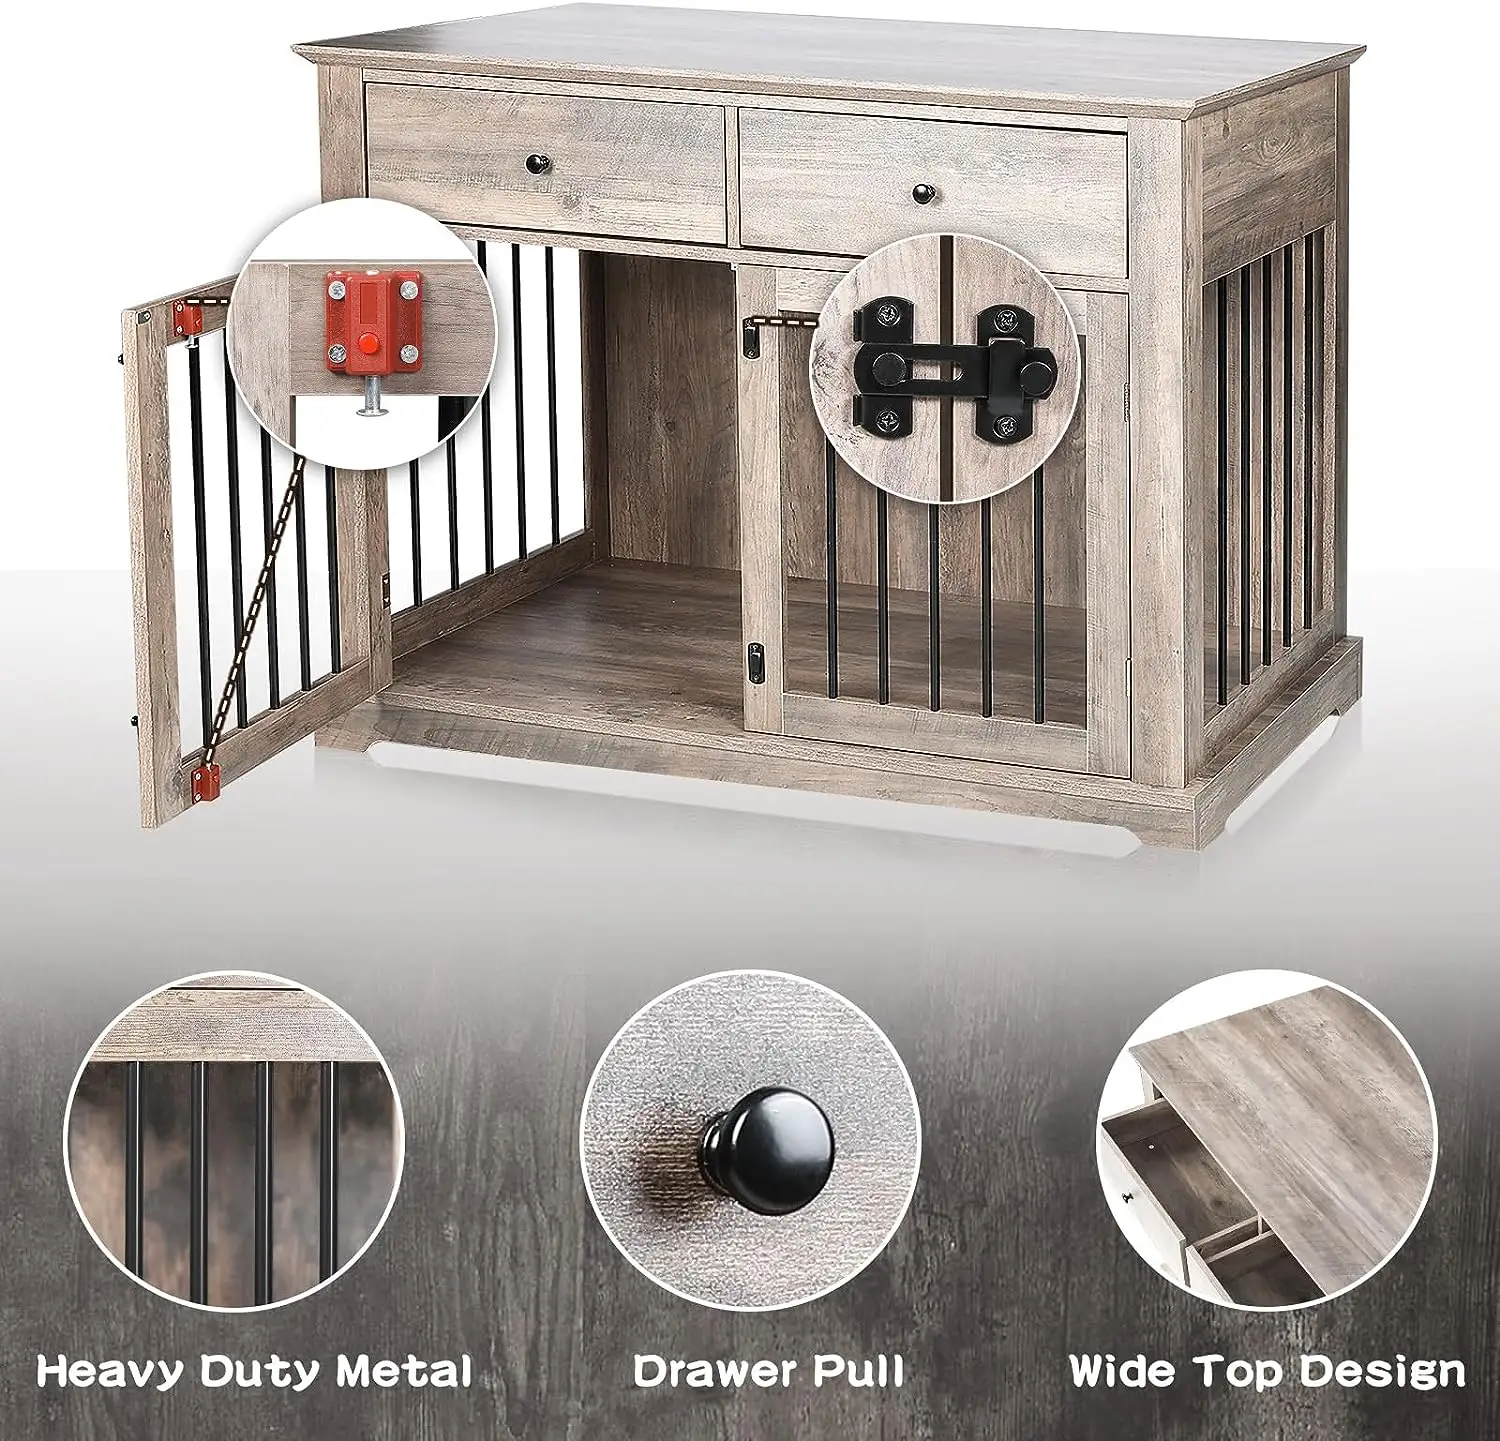 Indoor Decorative Pet Crates Dog House Wooden Dog Kennel End Table Dog Crate Furniture with Storage Drawers